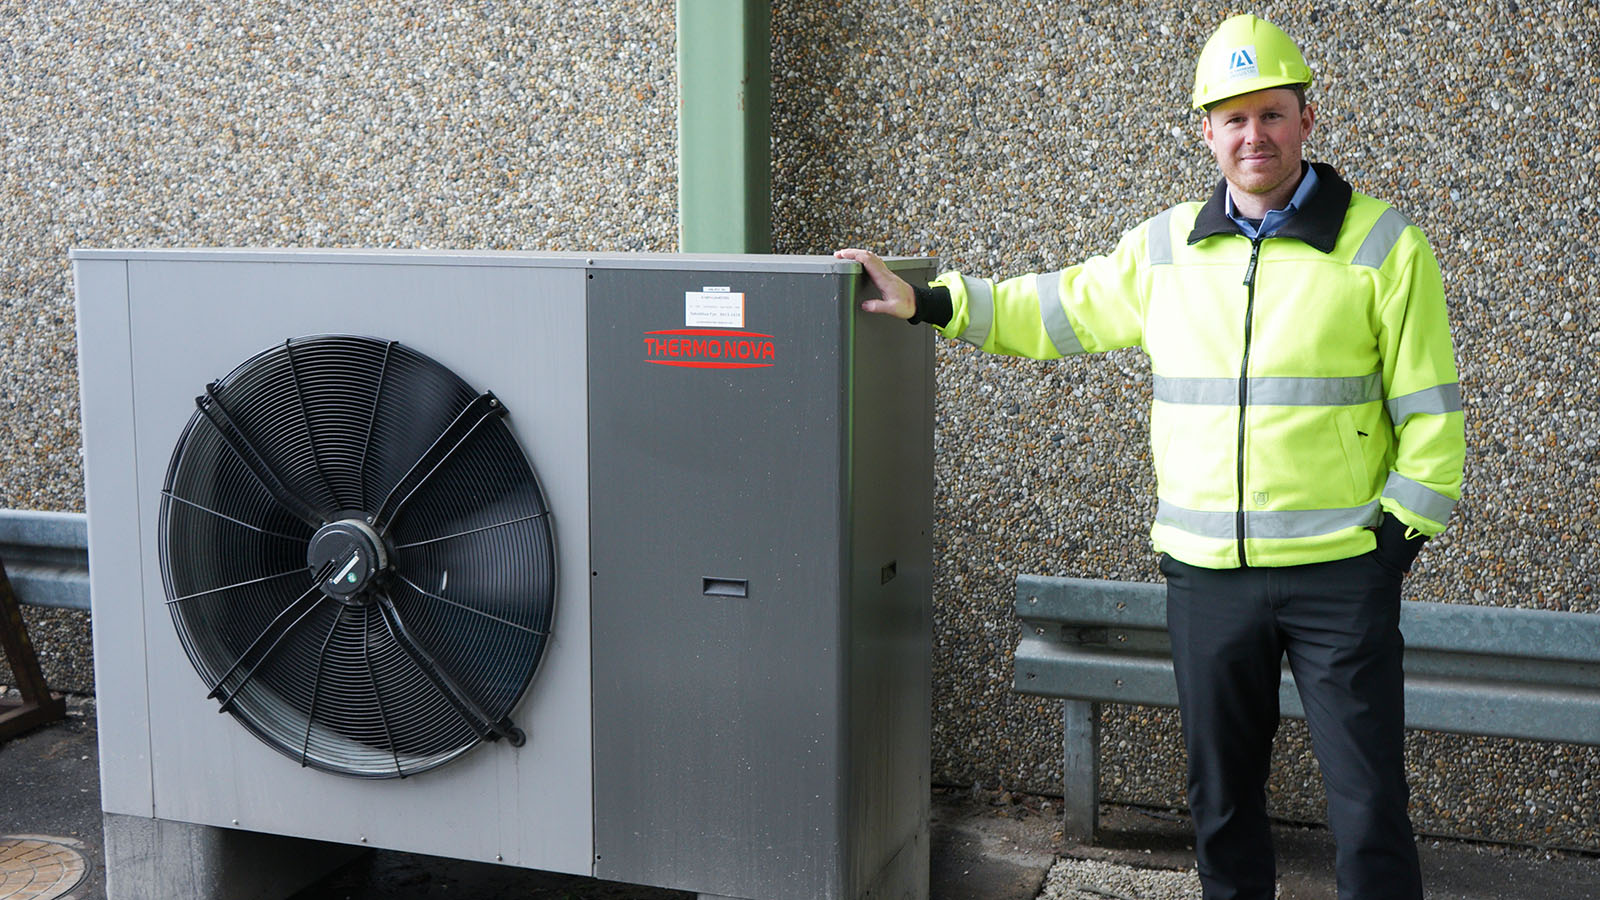 An Ib Andresen Industri employee stands beside a heat pump, casually resting a hand on it.